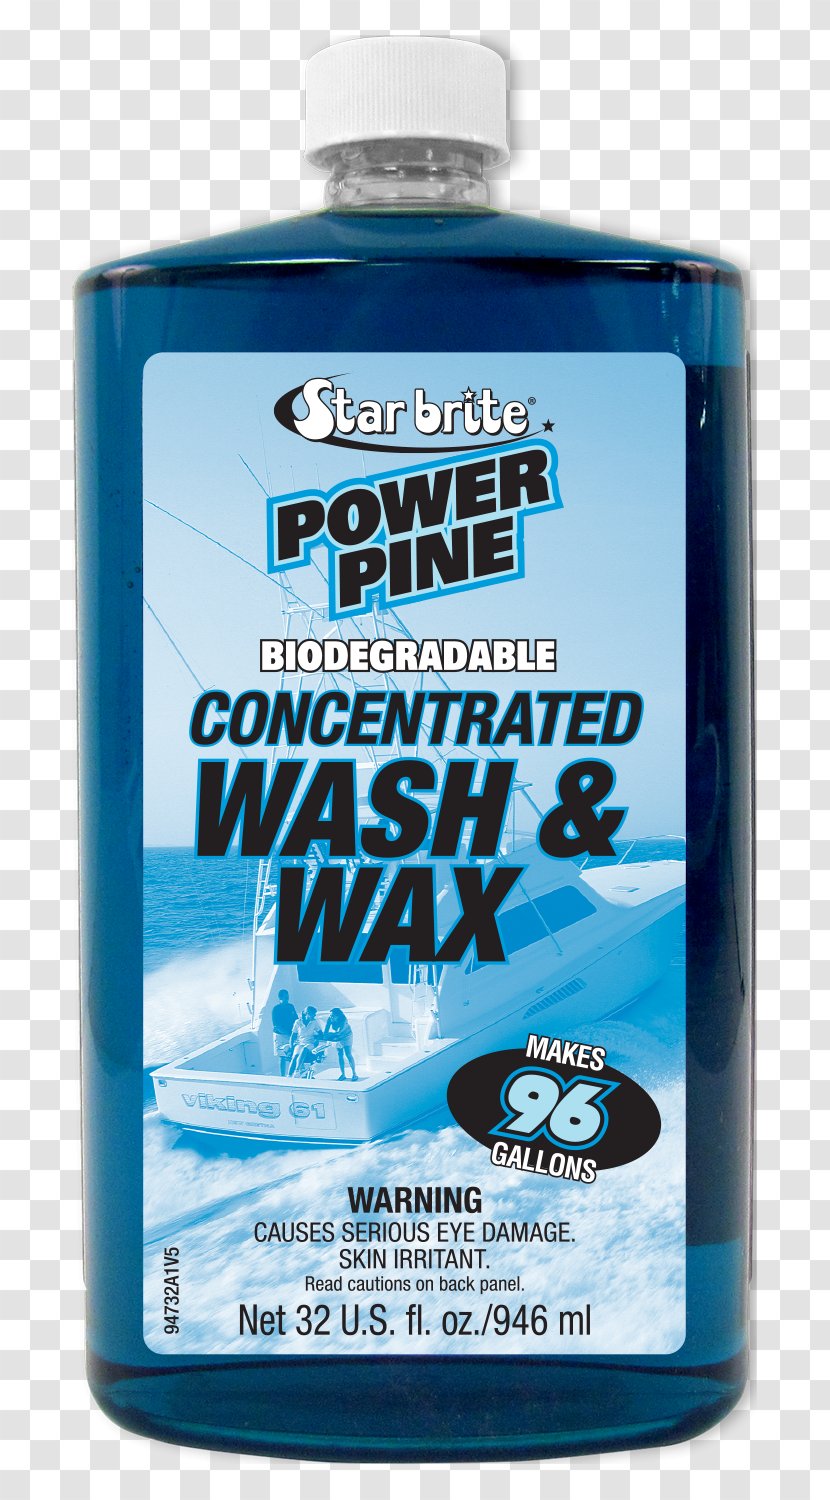 Water Solvent In Chemical Reactions Washing Cleaning Wax - Spray Transparent PNG